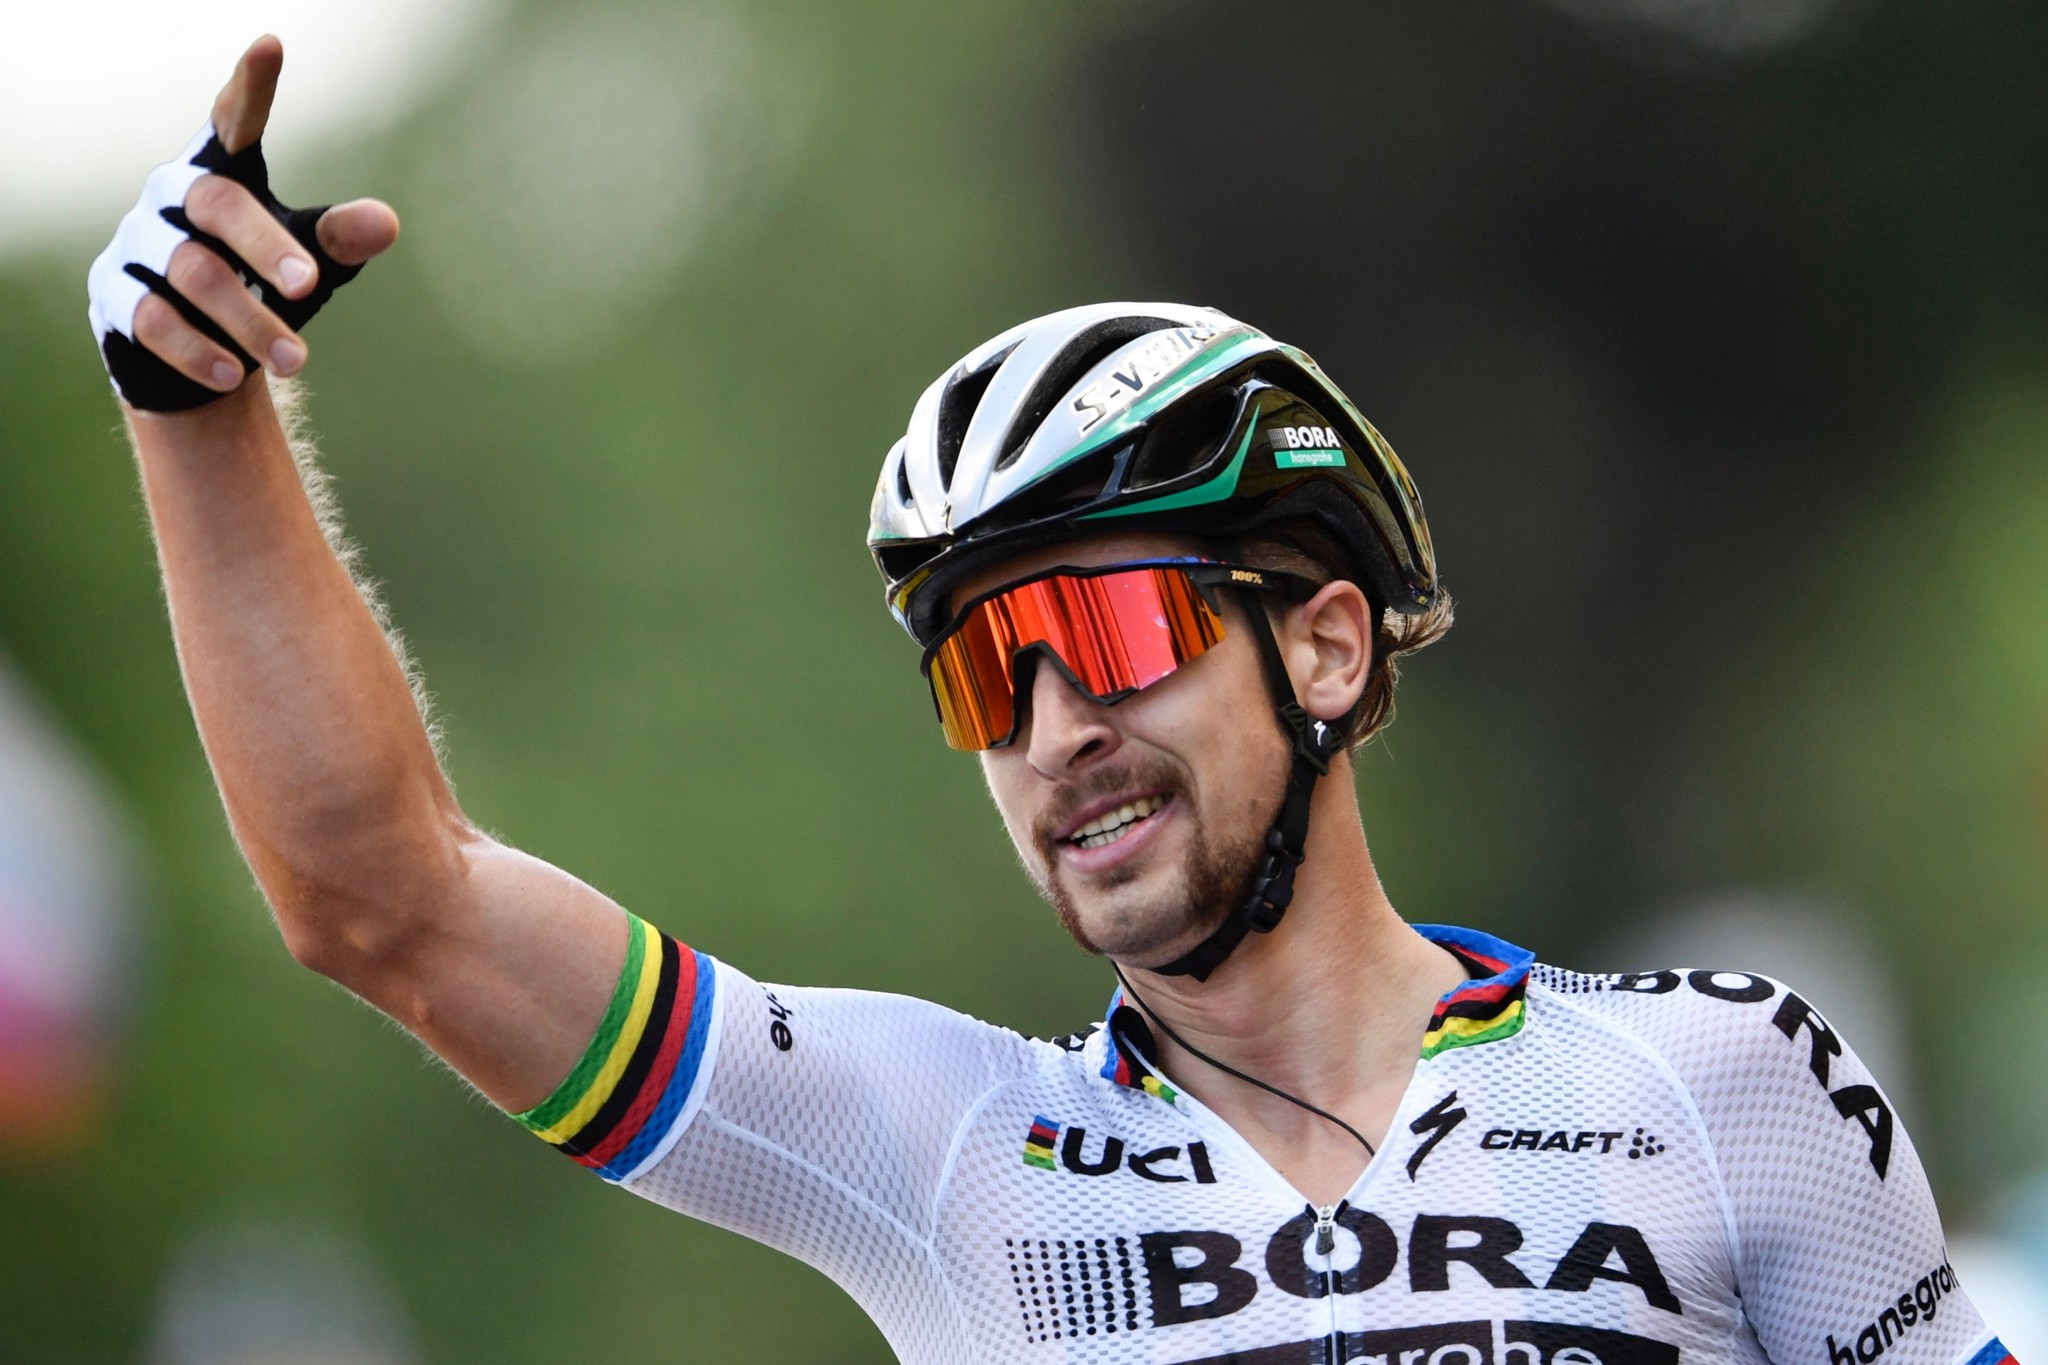 World champion Peter Sagan of Slovakia claimed the 100th victory of his career after coming out on top at the Grand Prix de Quebec ©Getty Images